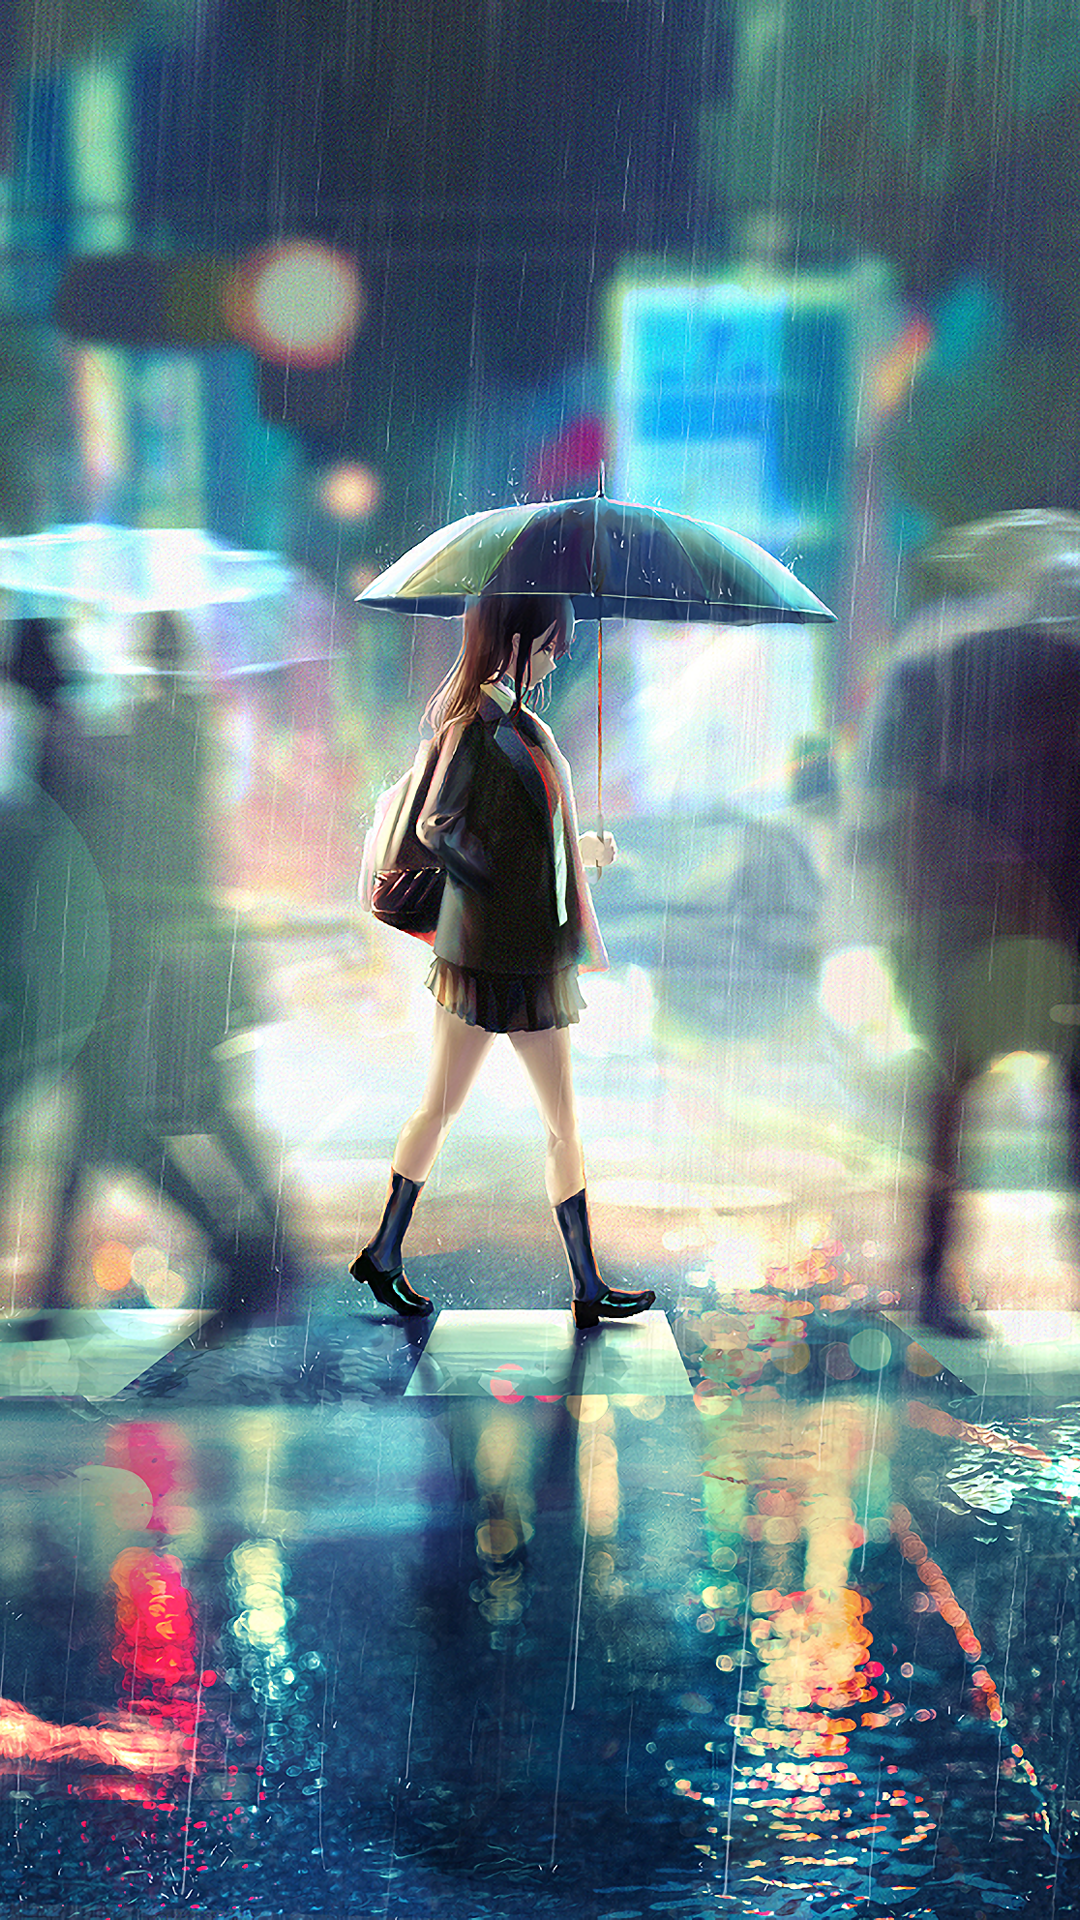 REQUEST] Can anyone add animated rain to this and convert it to gif?  710x992 resolution : r/AnimePhoneWallpapers